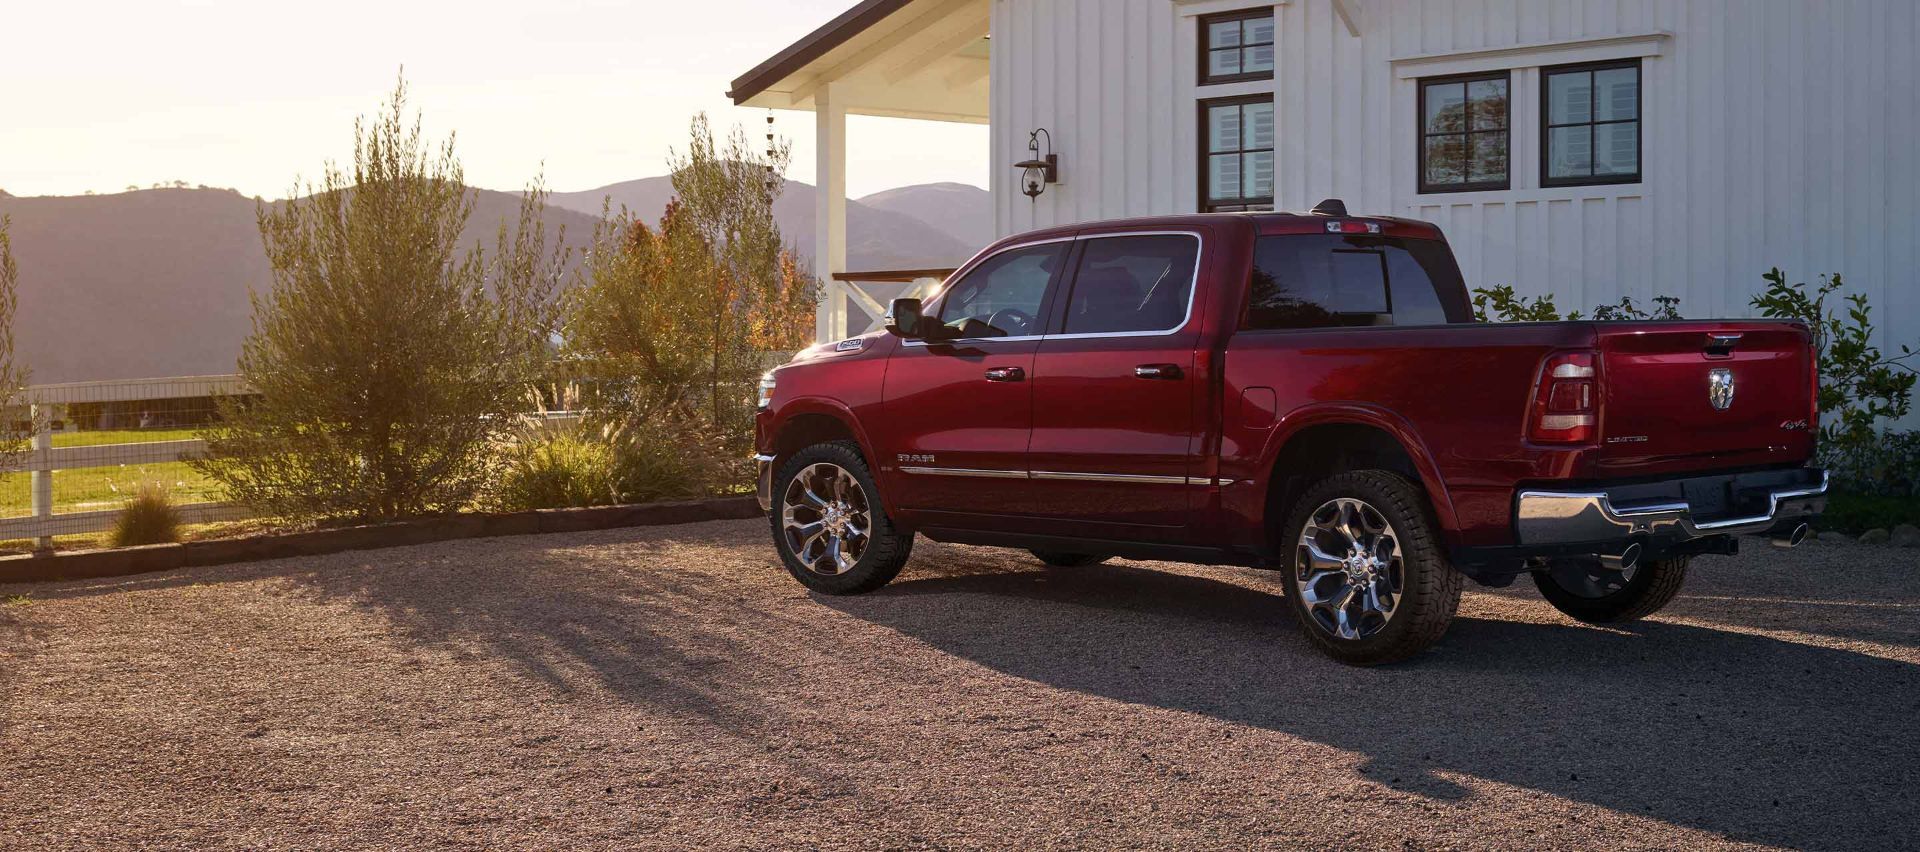 2023 Ram 1500 | Available Trims & Prices in Canada